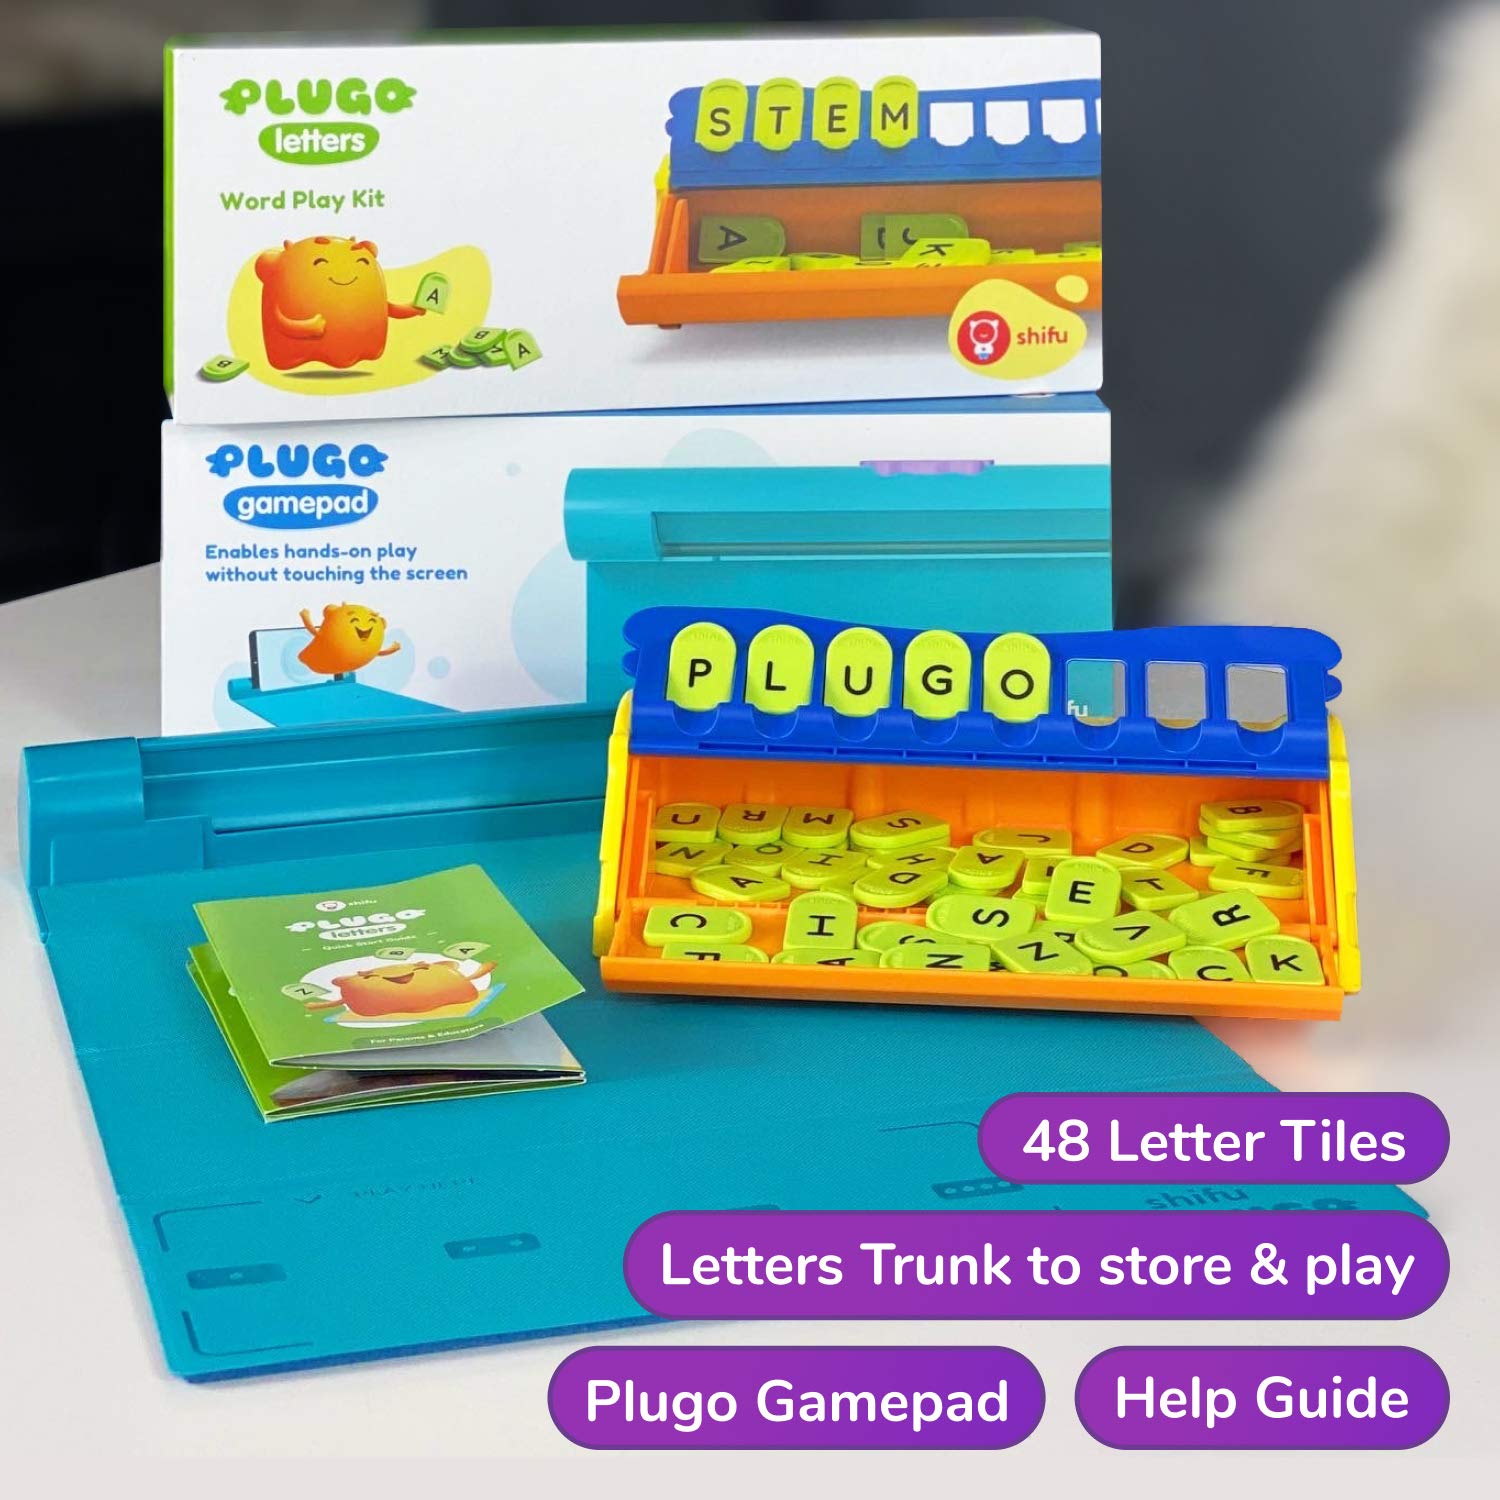 Plugo Letters by PlayShifu - Word Building with Phonics & Stories | 4-10 Years STEM Toy | Interactive Vocabulary Games | Boys & Girls Gift (works with iPads, iPhones, Samsung tabs/phones, Kindle Fire)